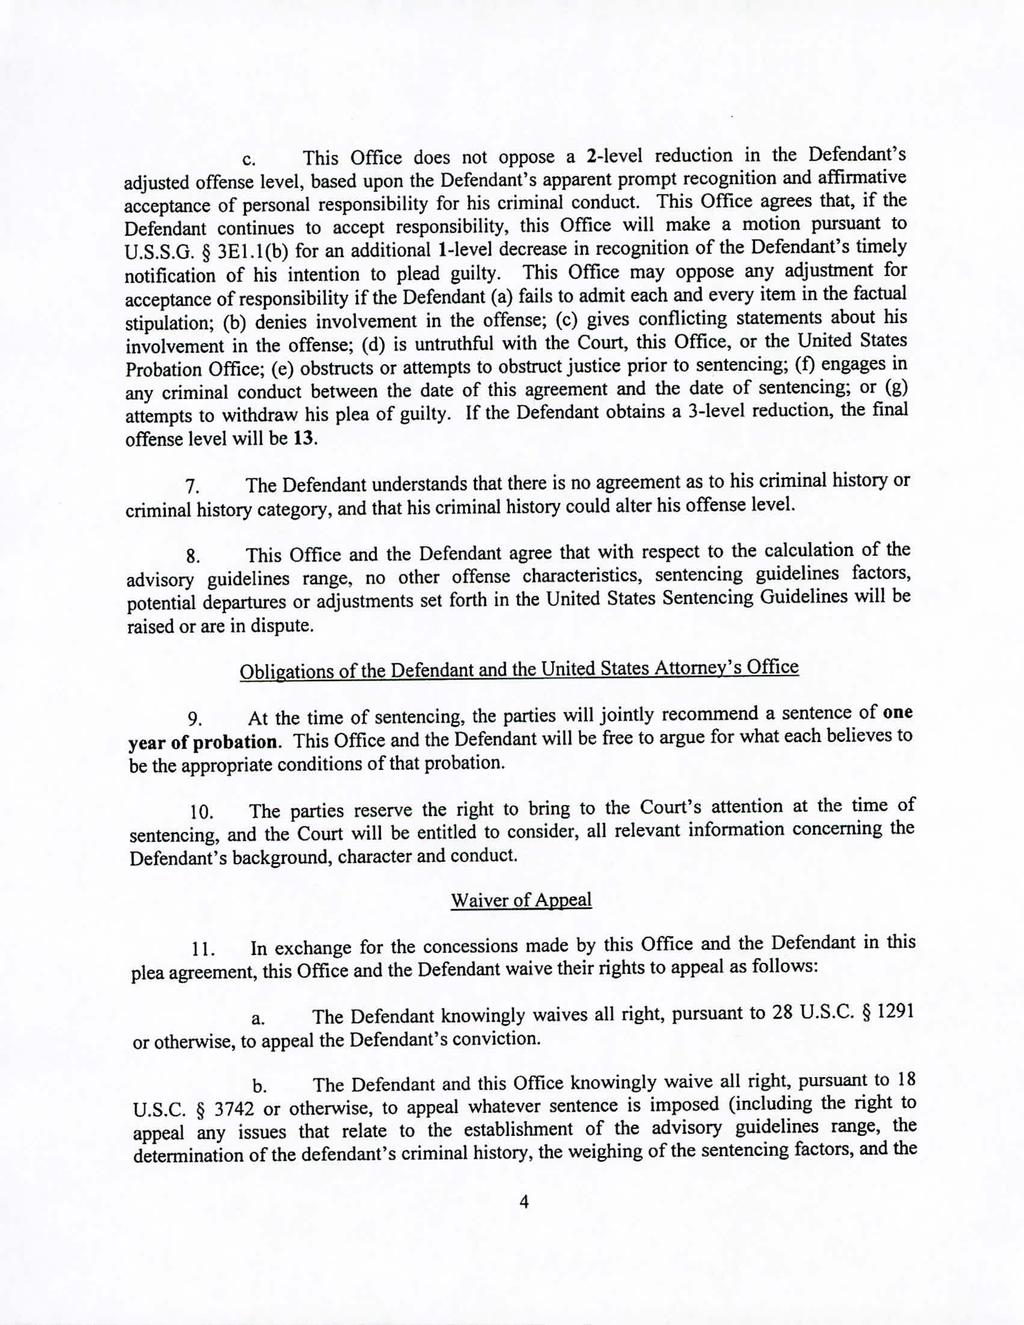 Case 8:16-cr-00023-WGC Document 5 Filed 02/01/16 Page 4 of 7 c.